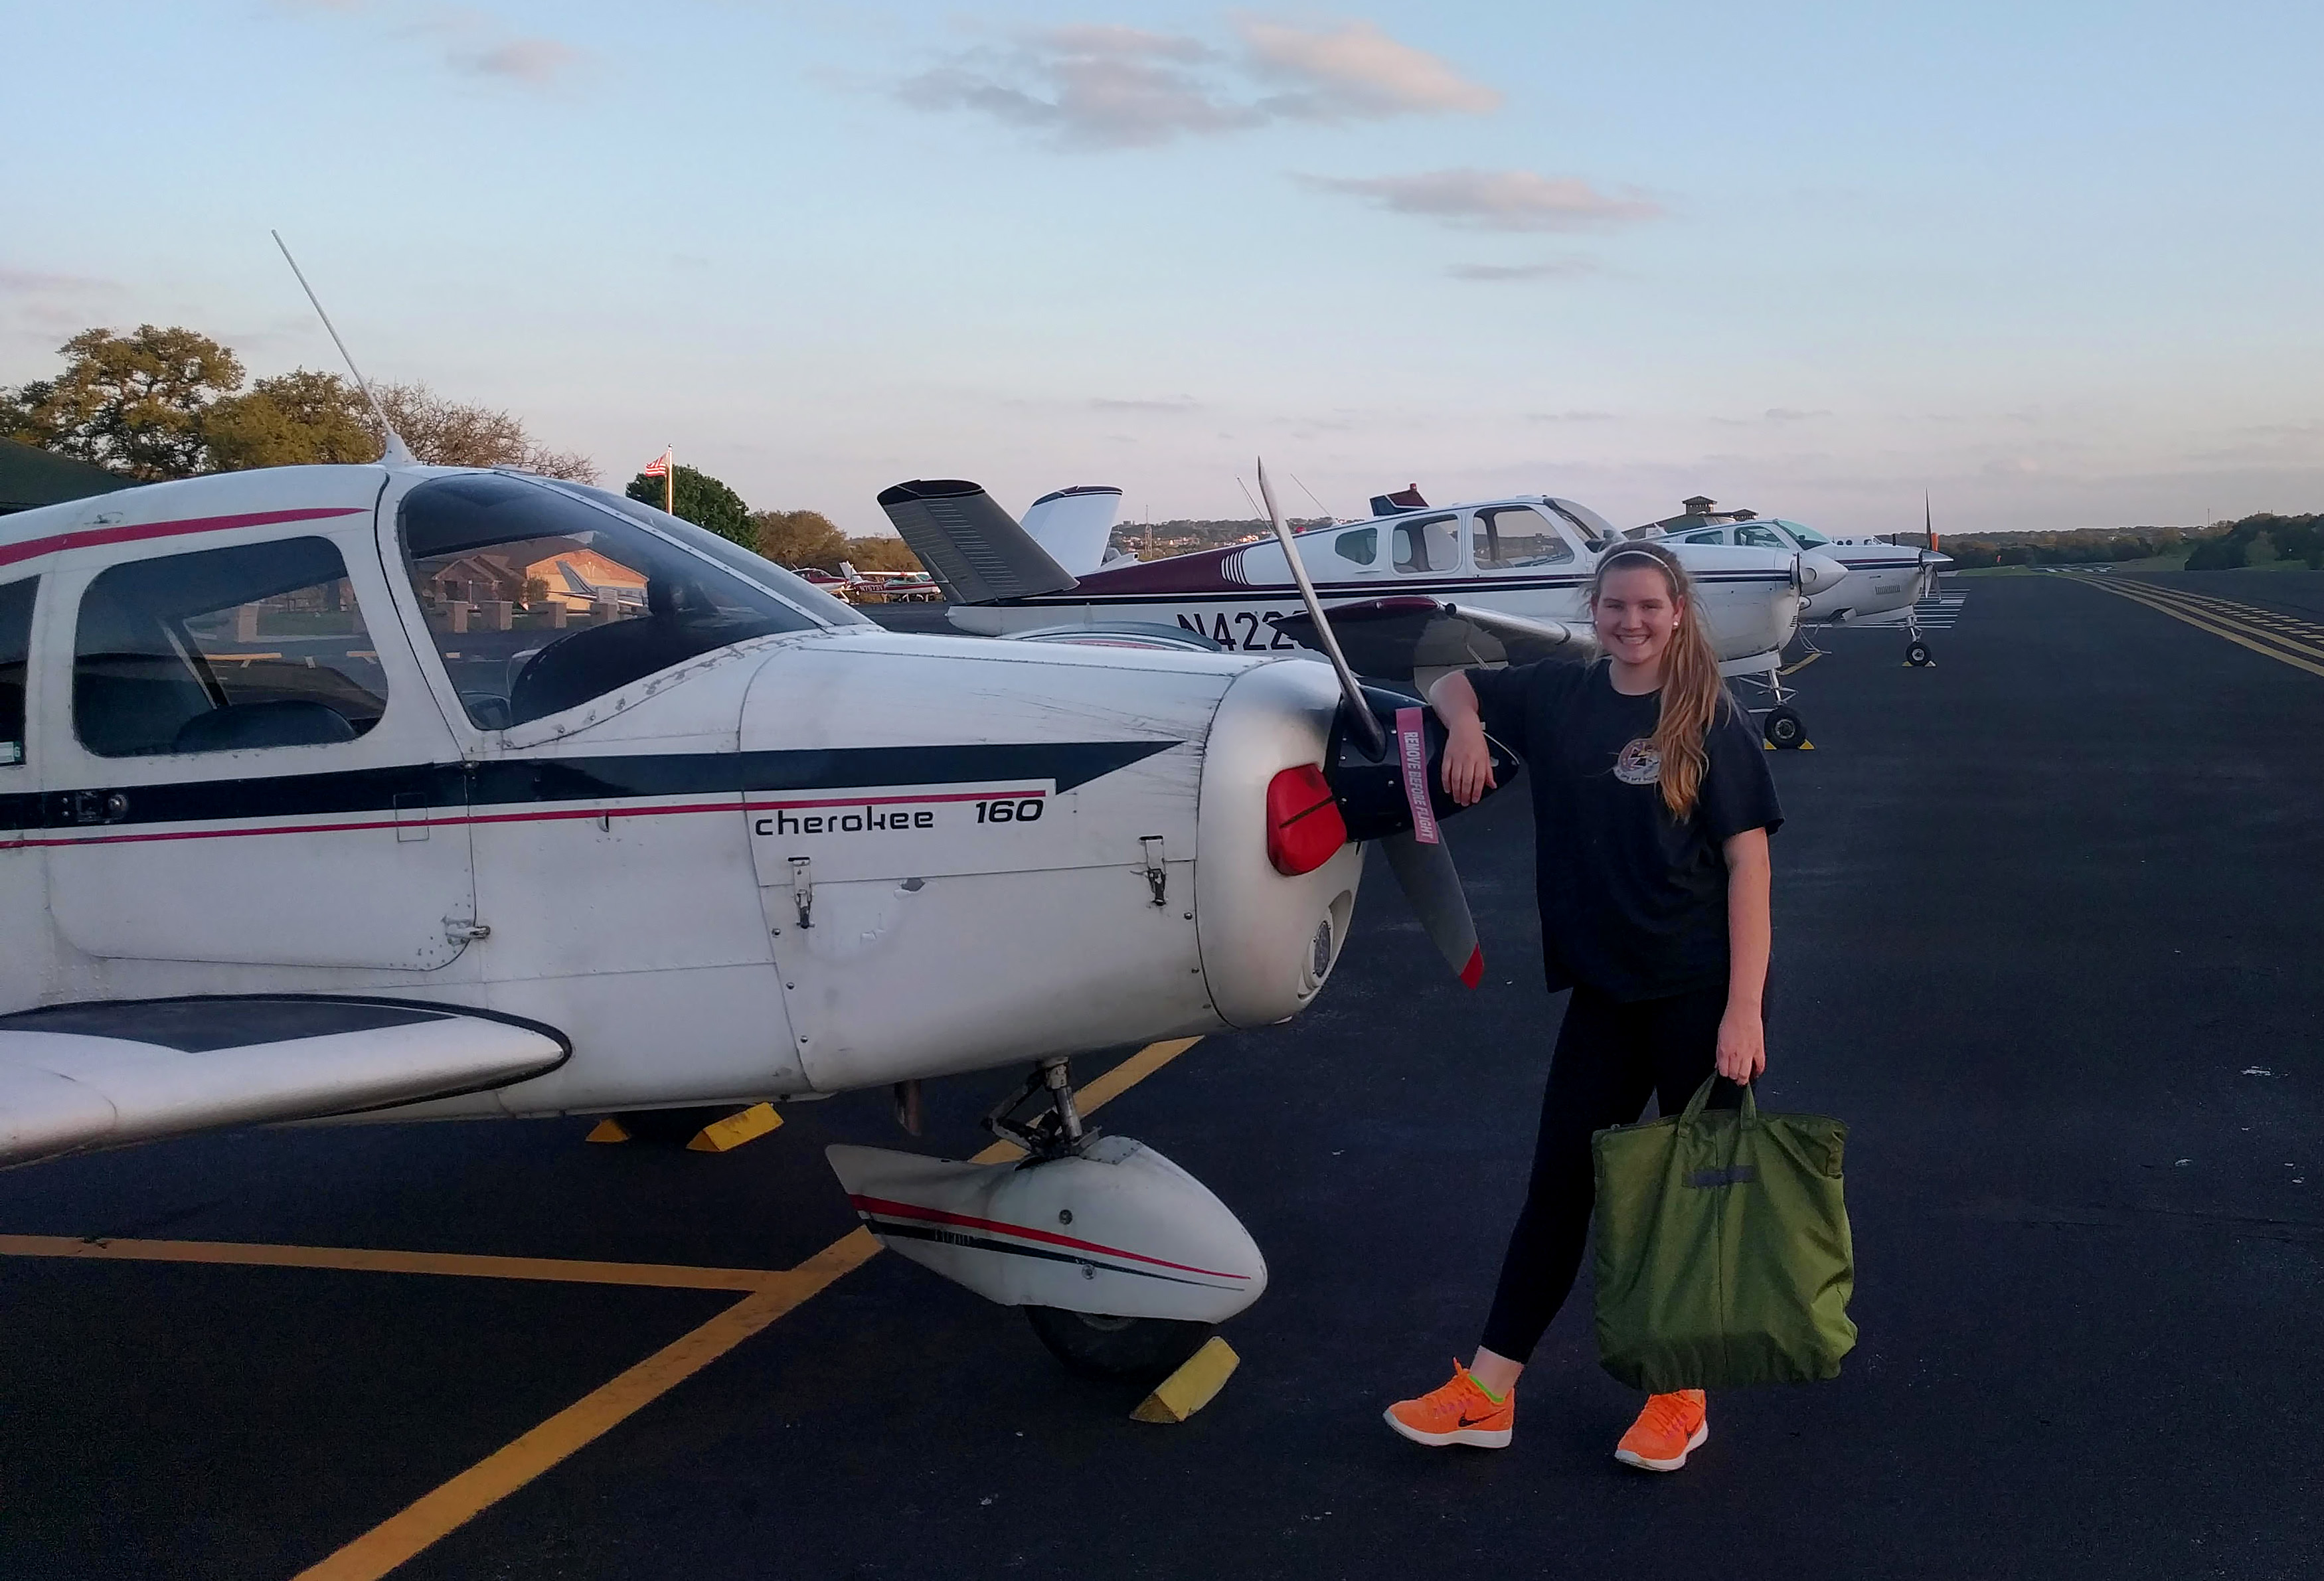 Student pilot Lauryn Spinetta with the Piper Cherokee PA-28 160 she is using for flight training. Photo courtesy of Lauryn Spinetta.